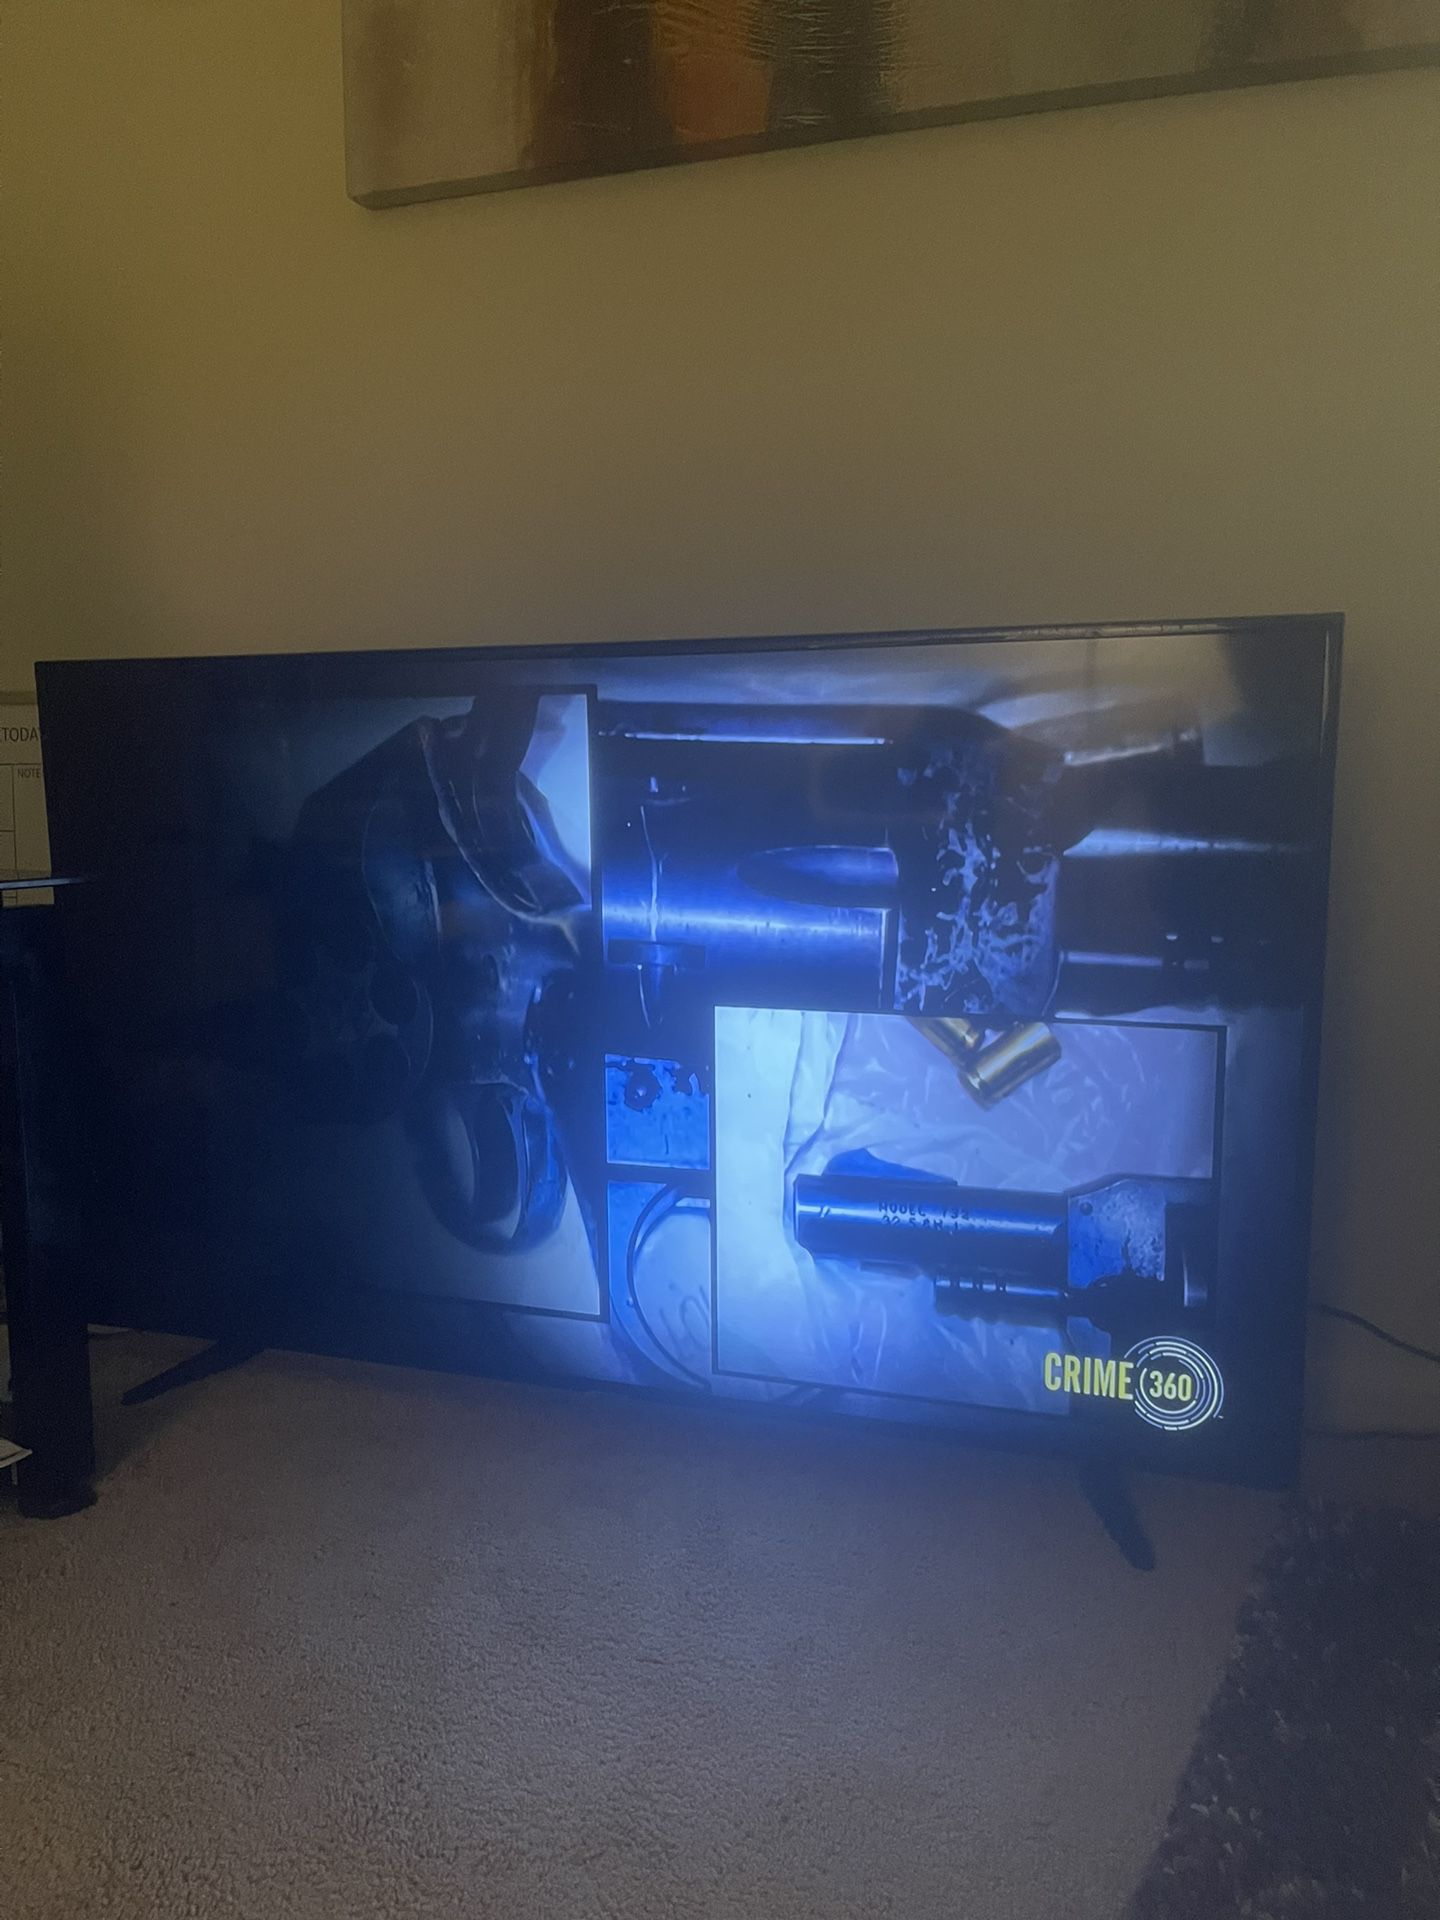 TWO Samsung 55 Inch With Defects